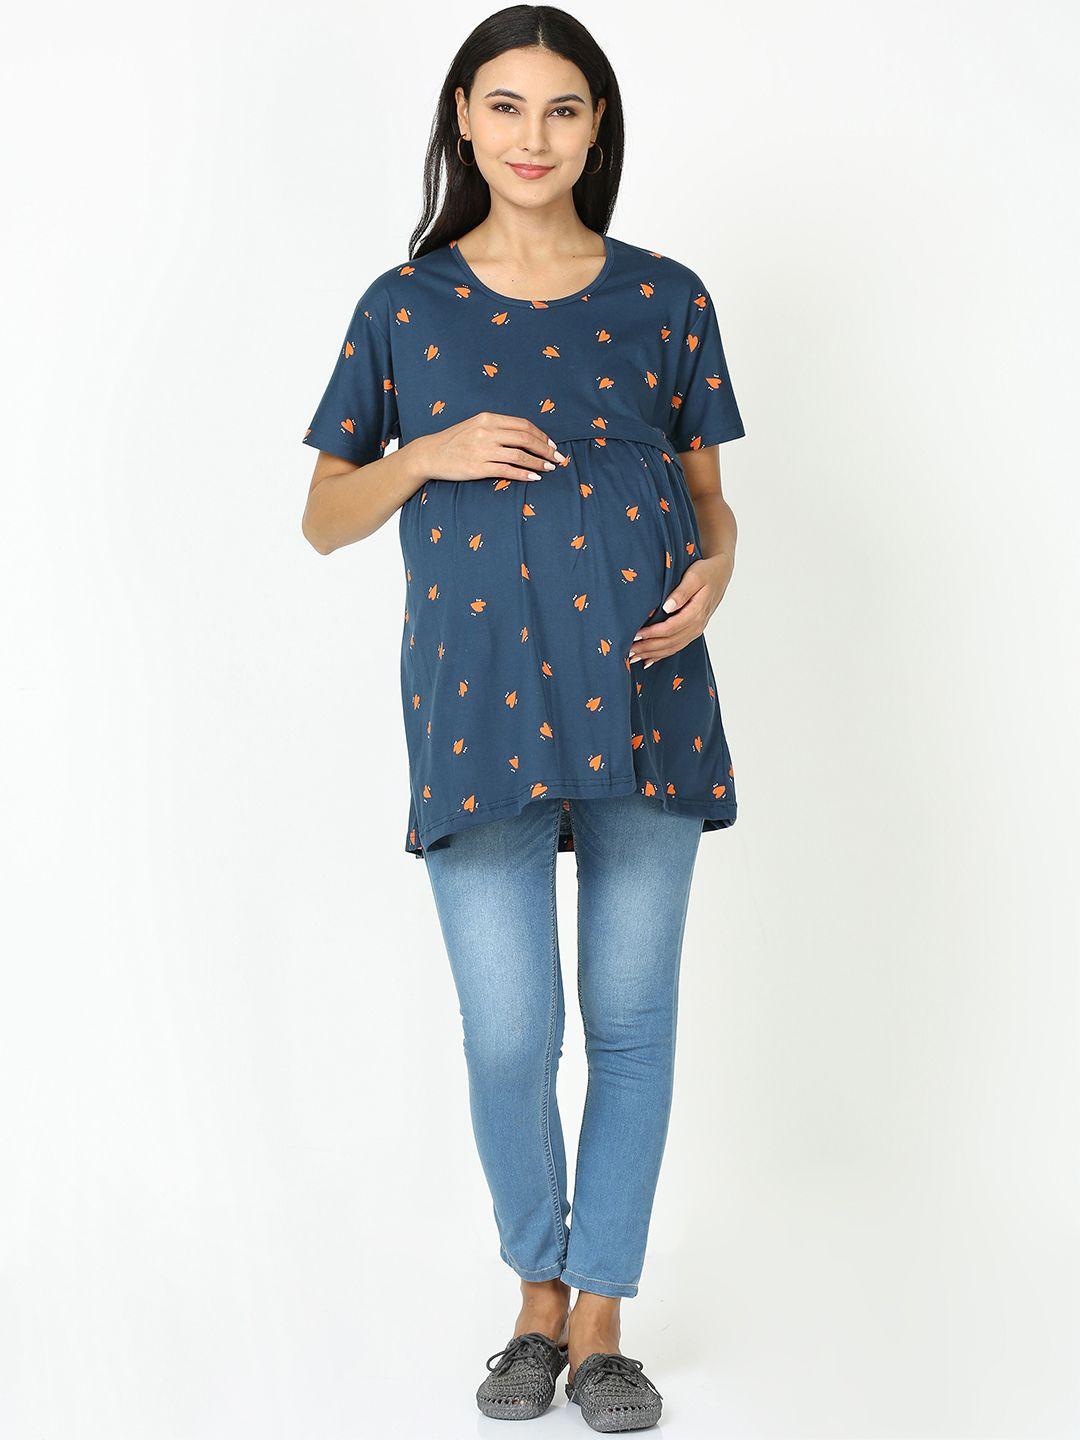 9shines label conversational printed cotton maternity top